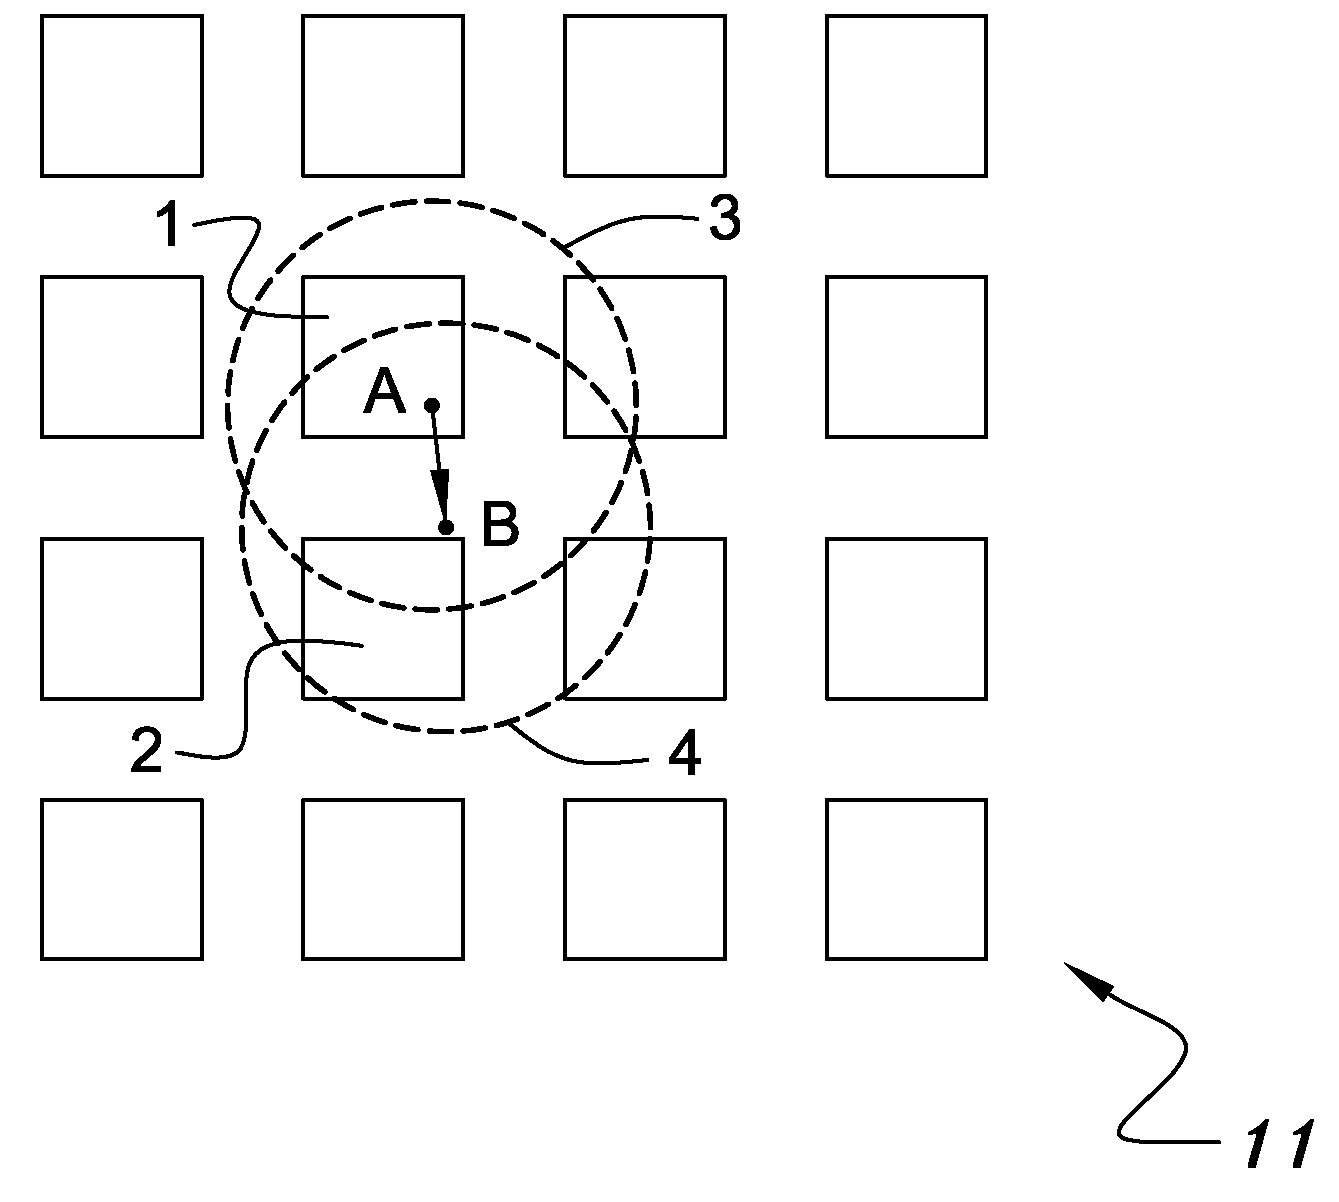 Capacitive keyboard with non-locking reduced keying ambiguity